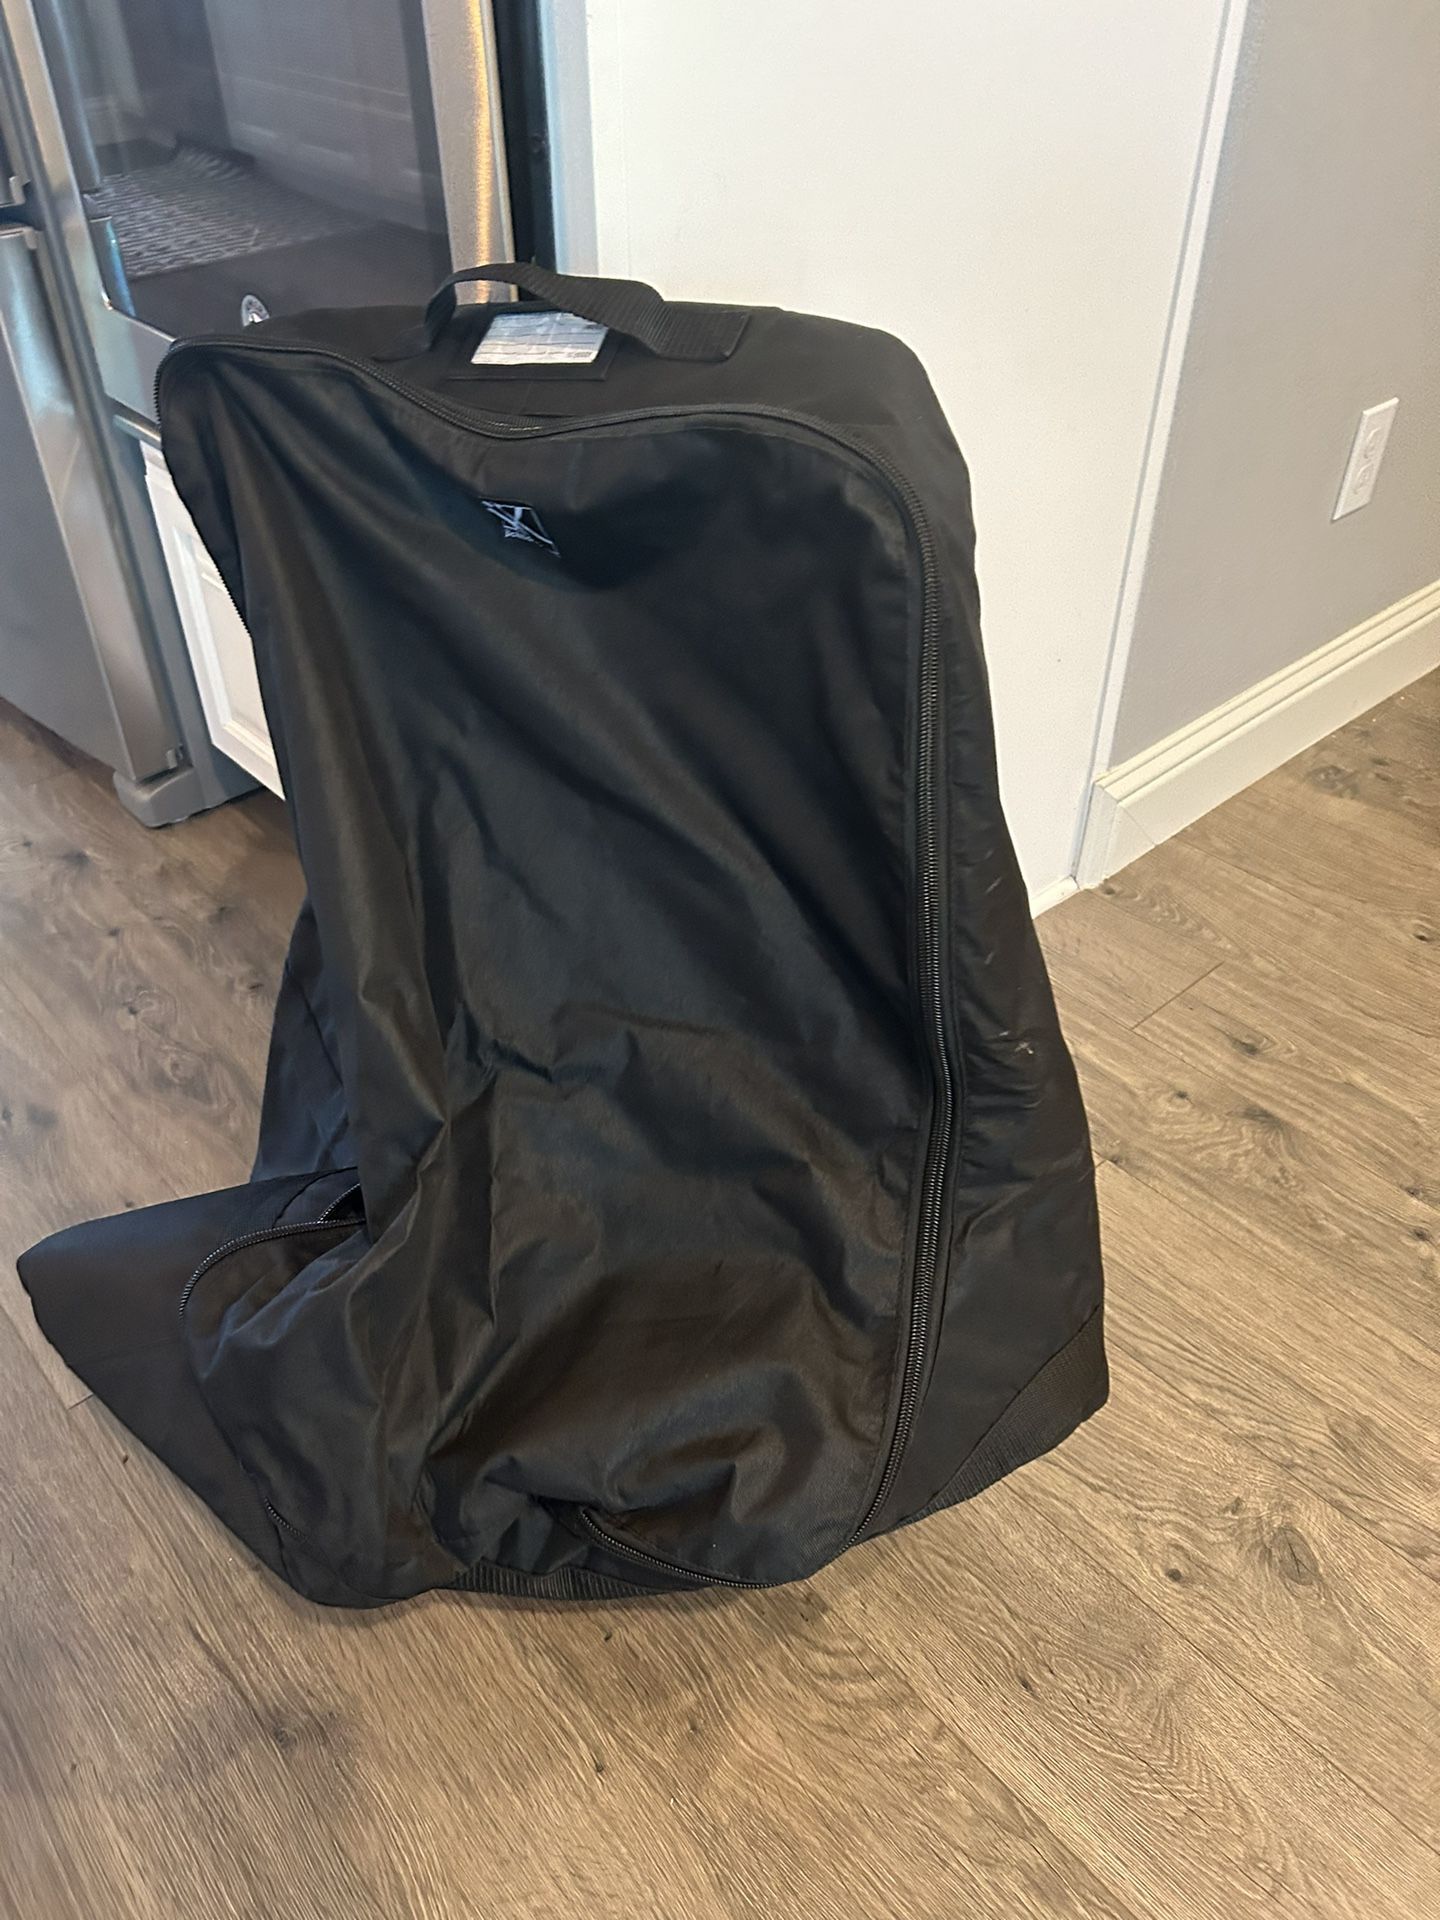 Large Travel Backpack For Car Seat